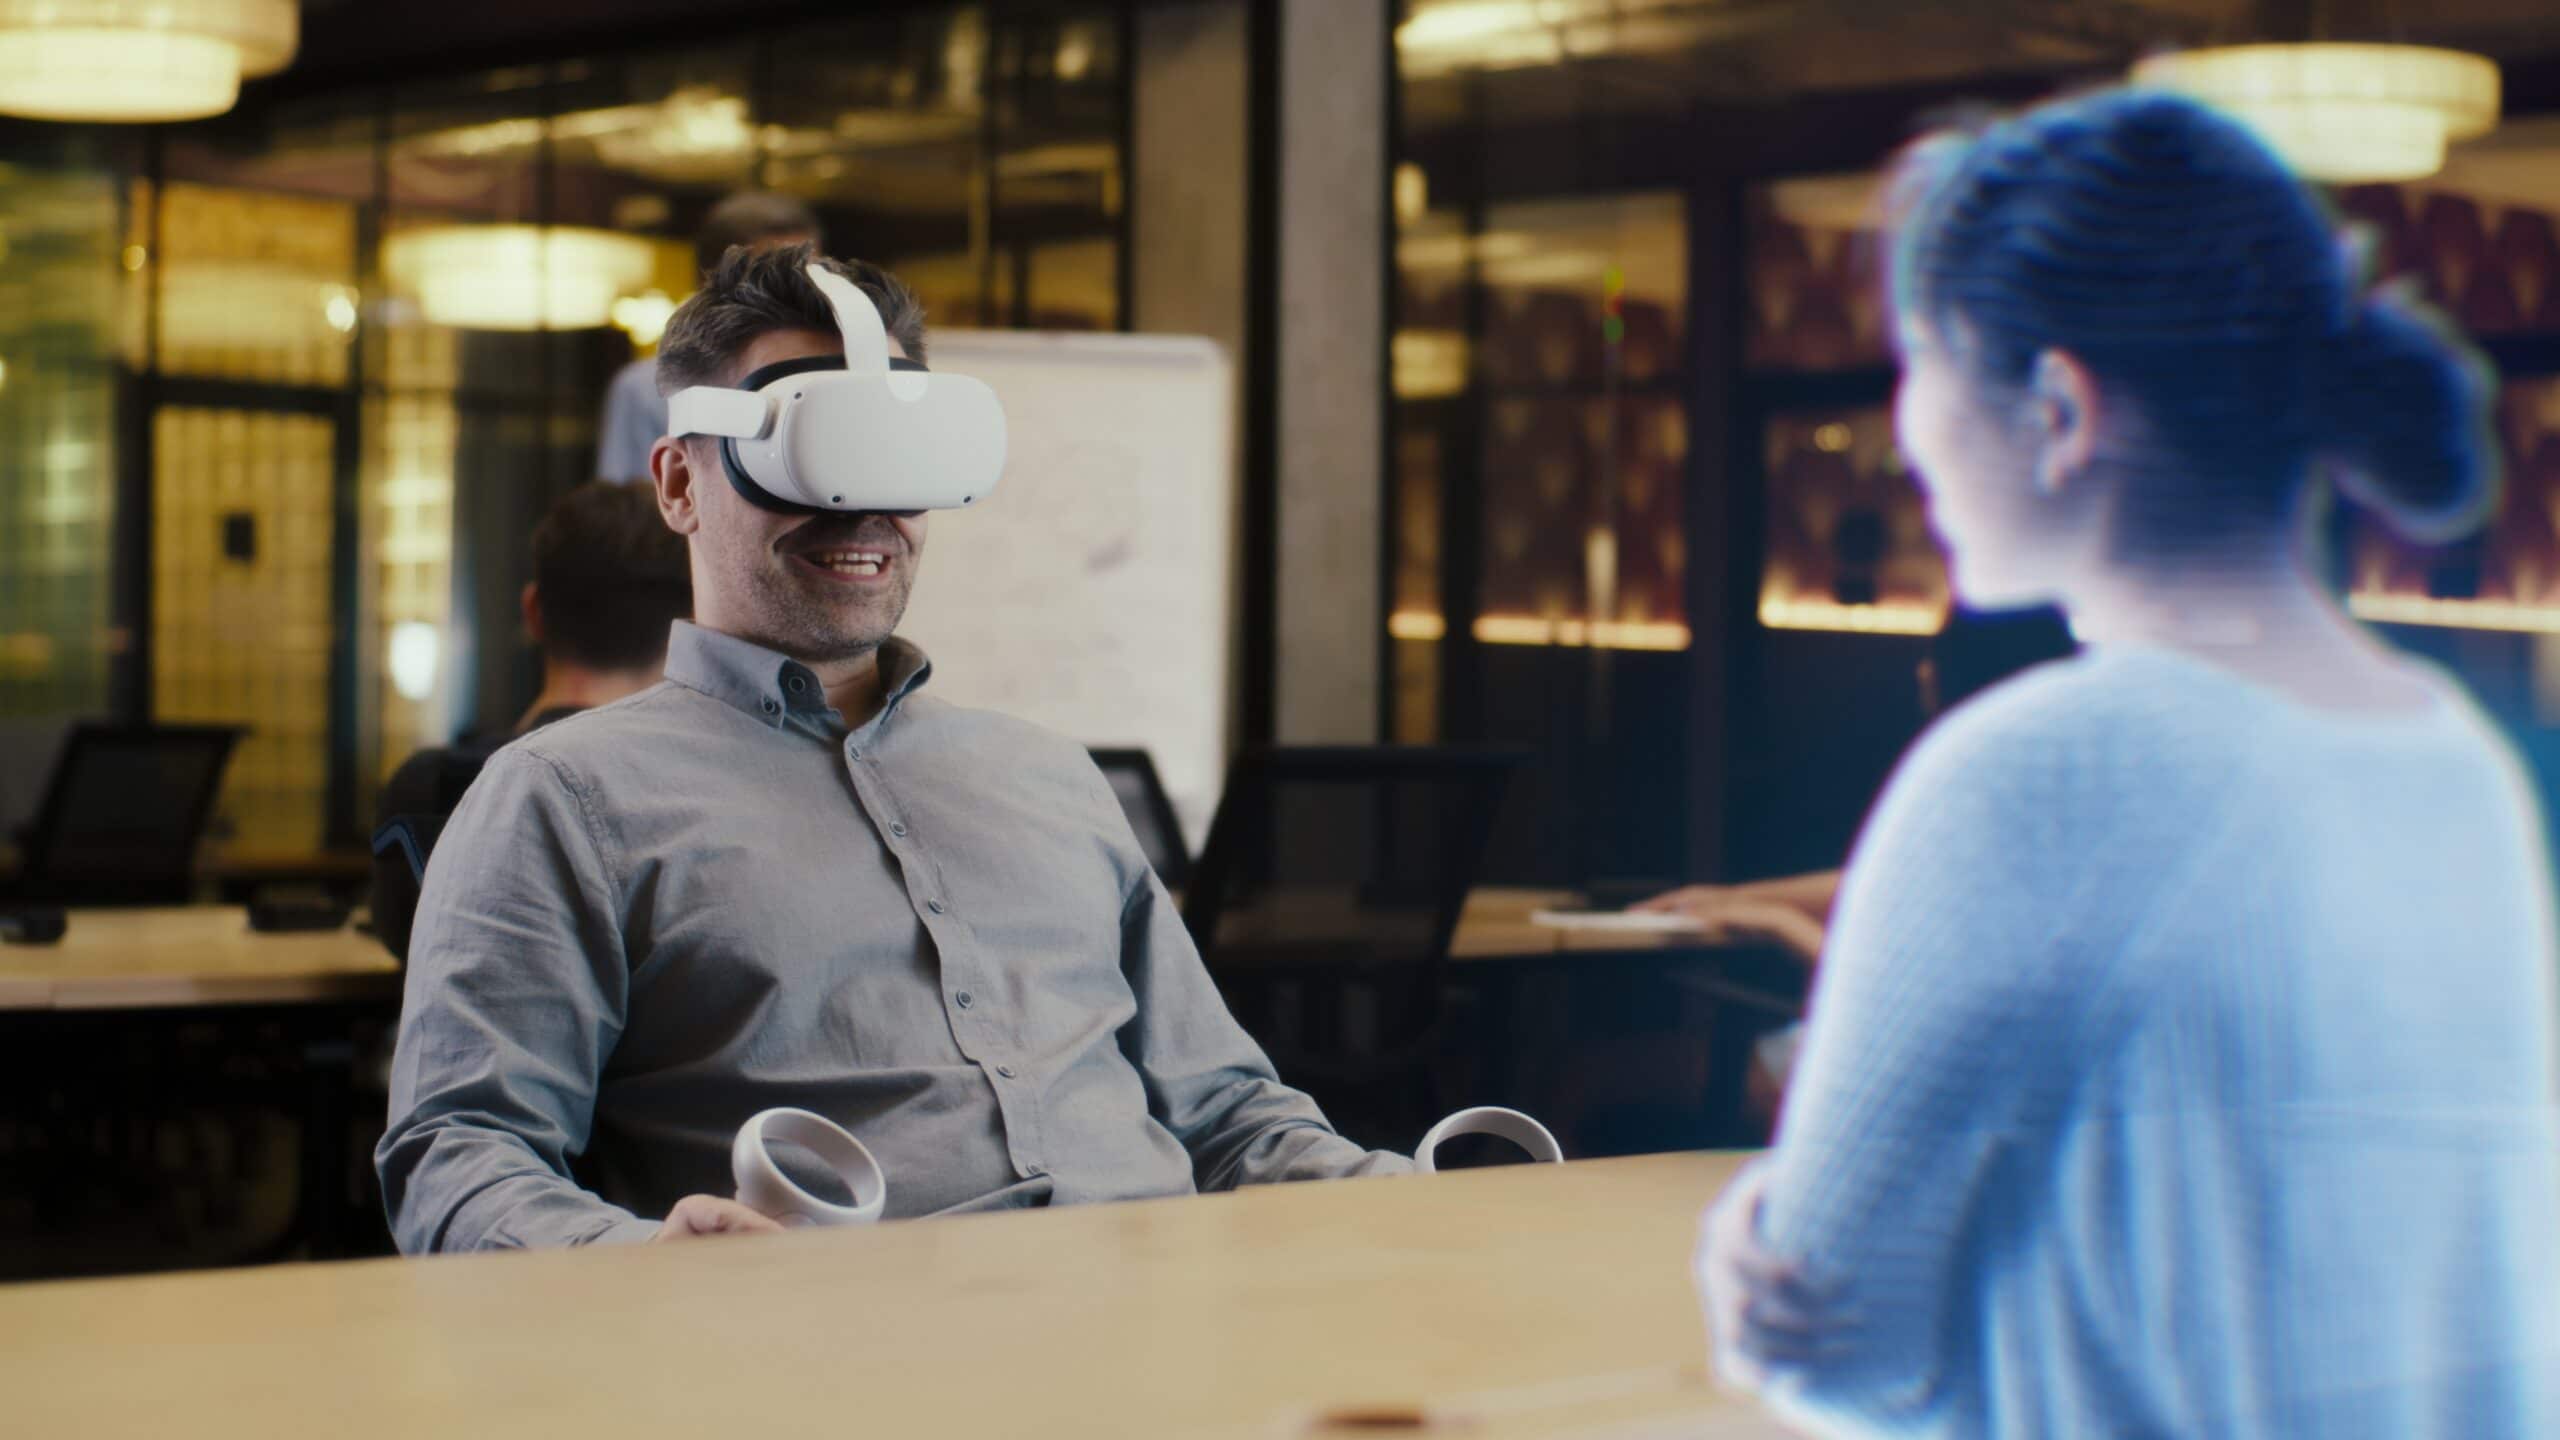 Training and evaluating employees with virtual reality